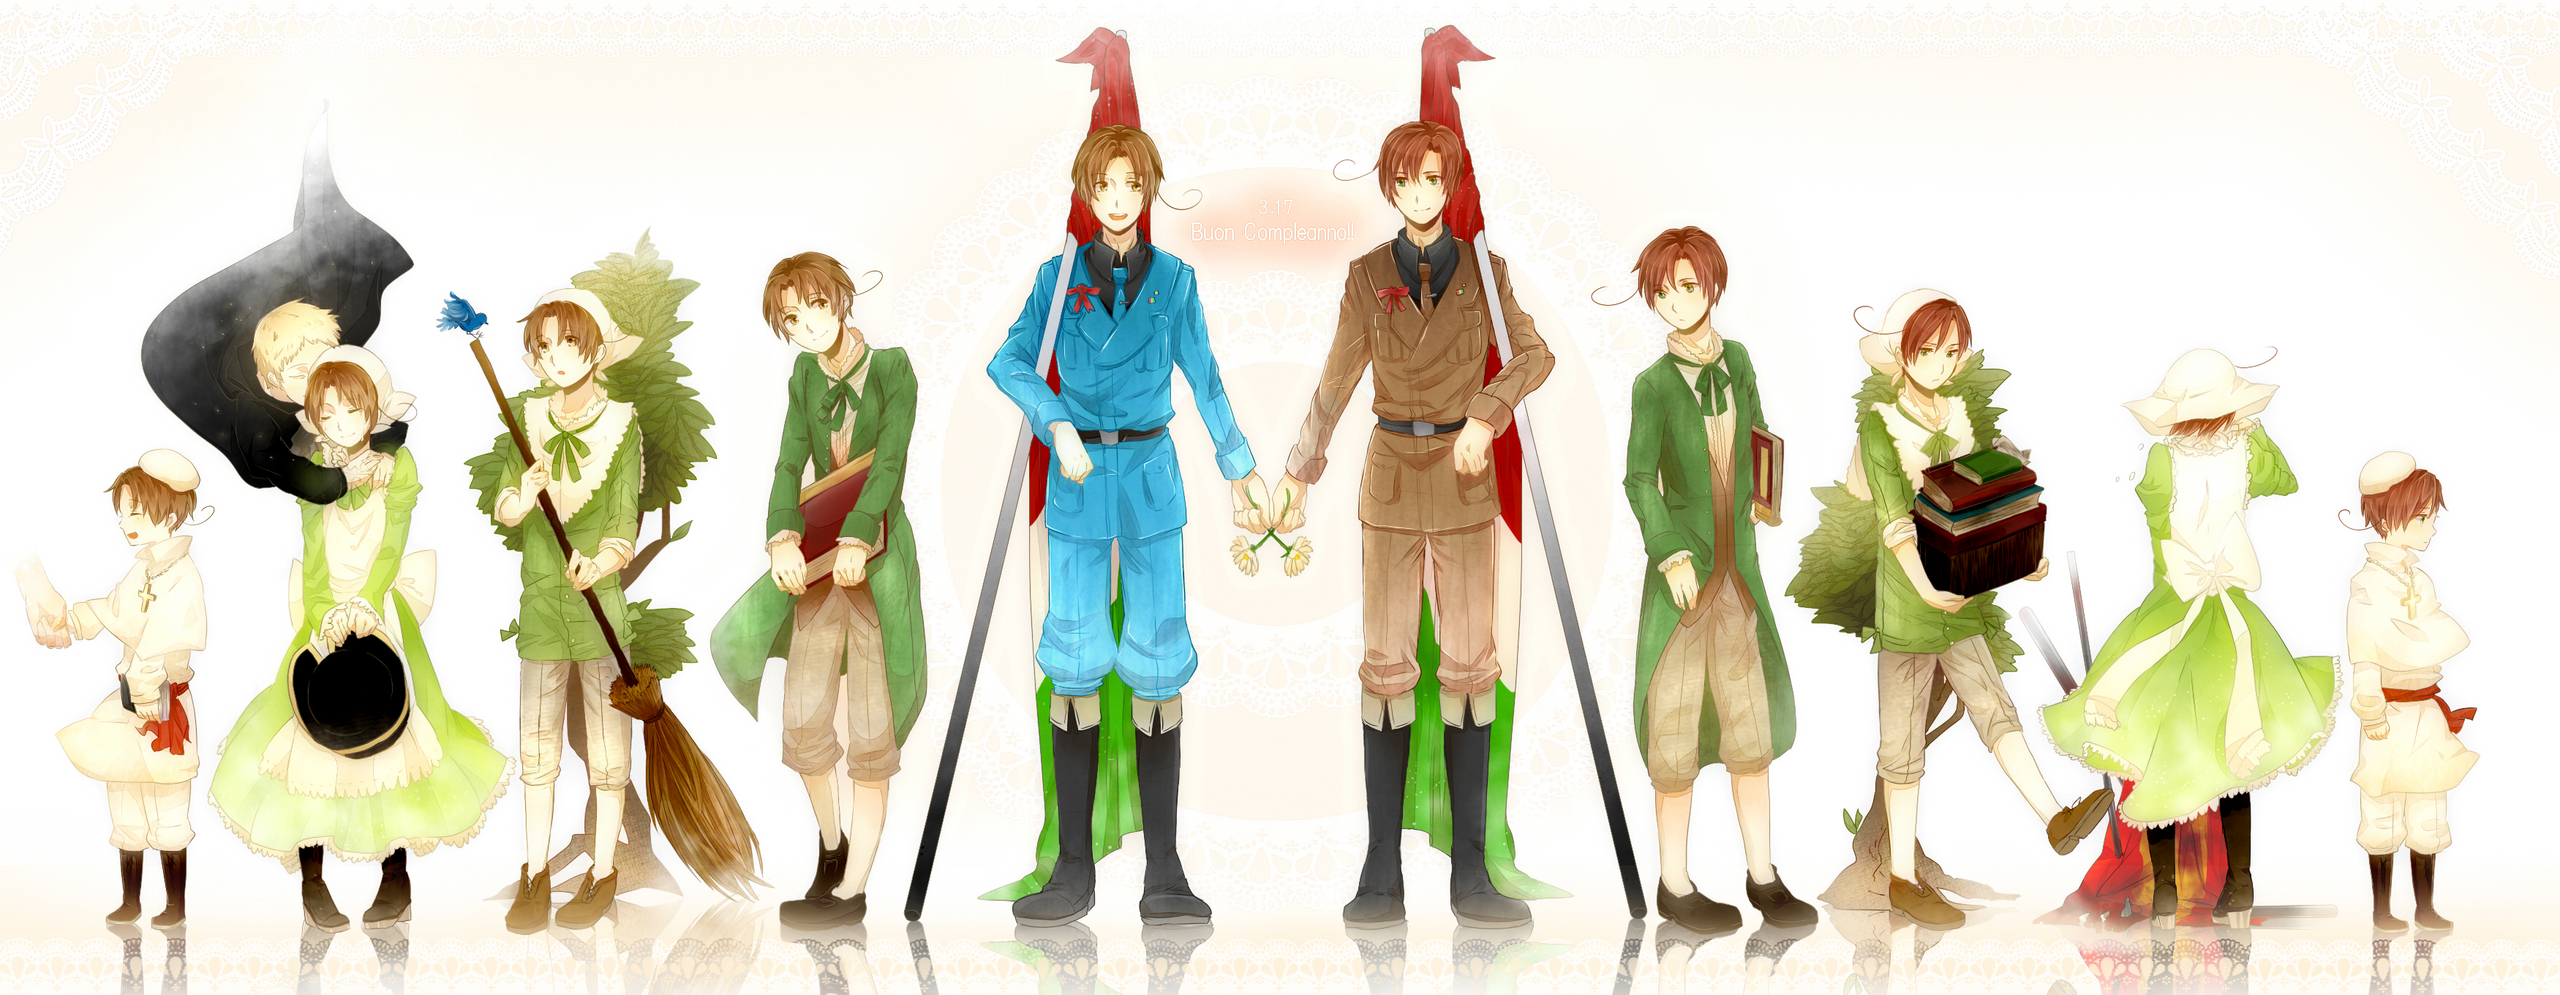 Hetalia Italy Image Brothers HD Wallpaper And